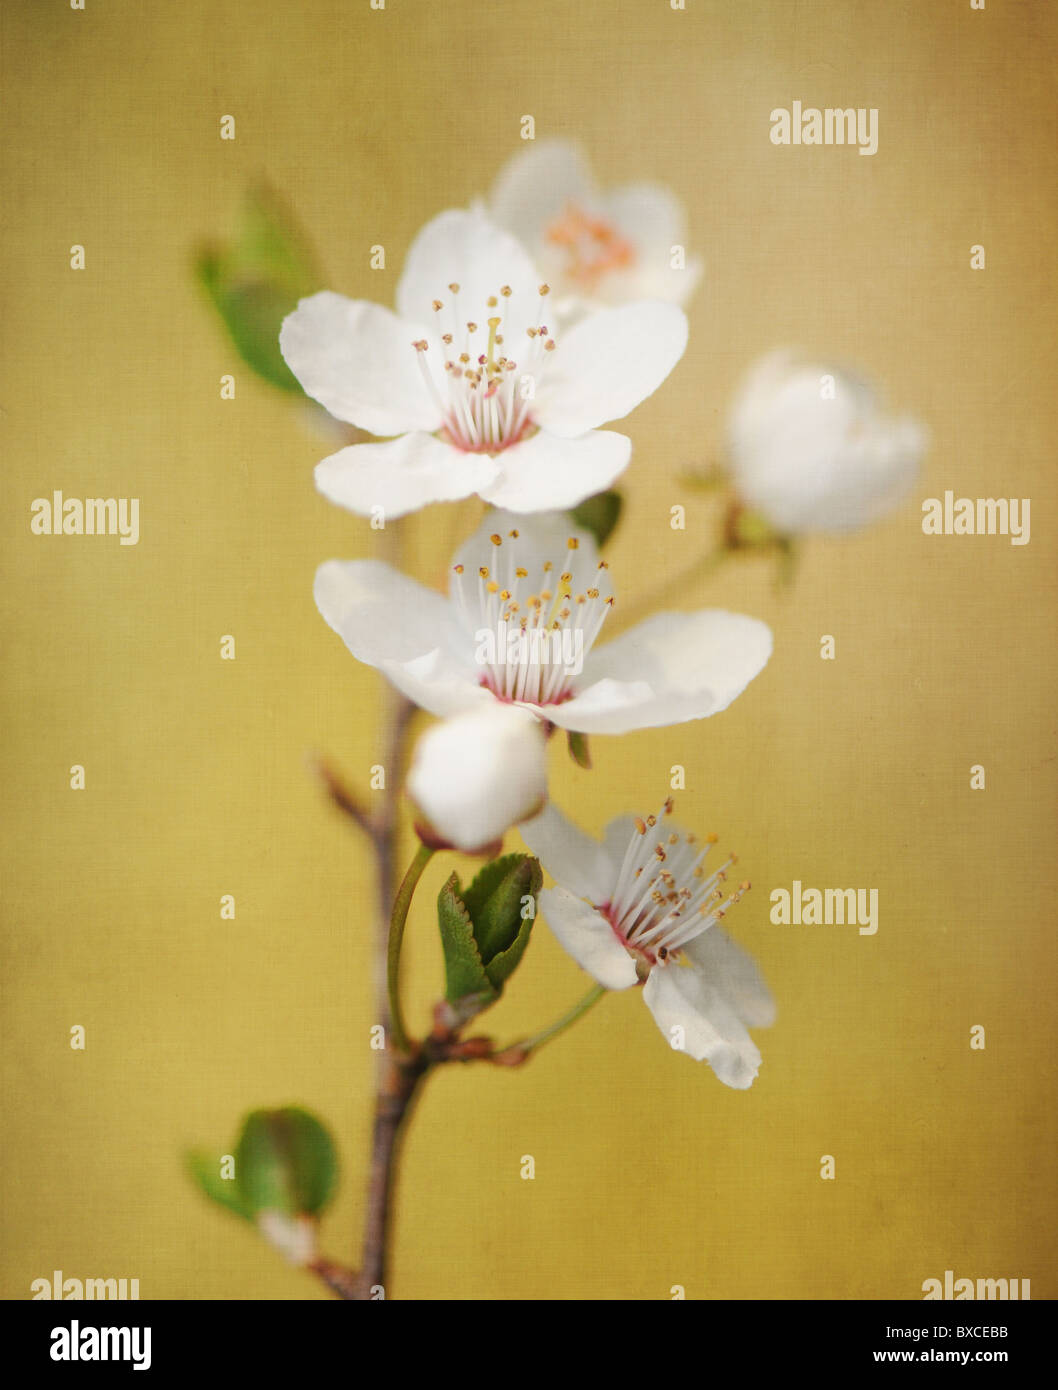 Close-up of white apple blossom flowers Stock Photo